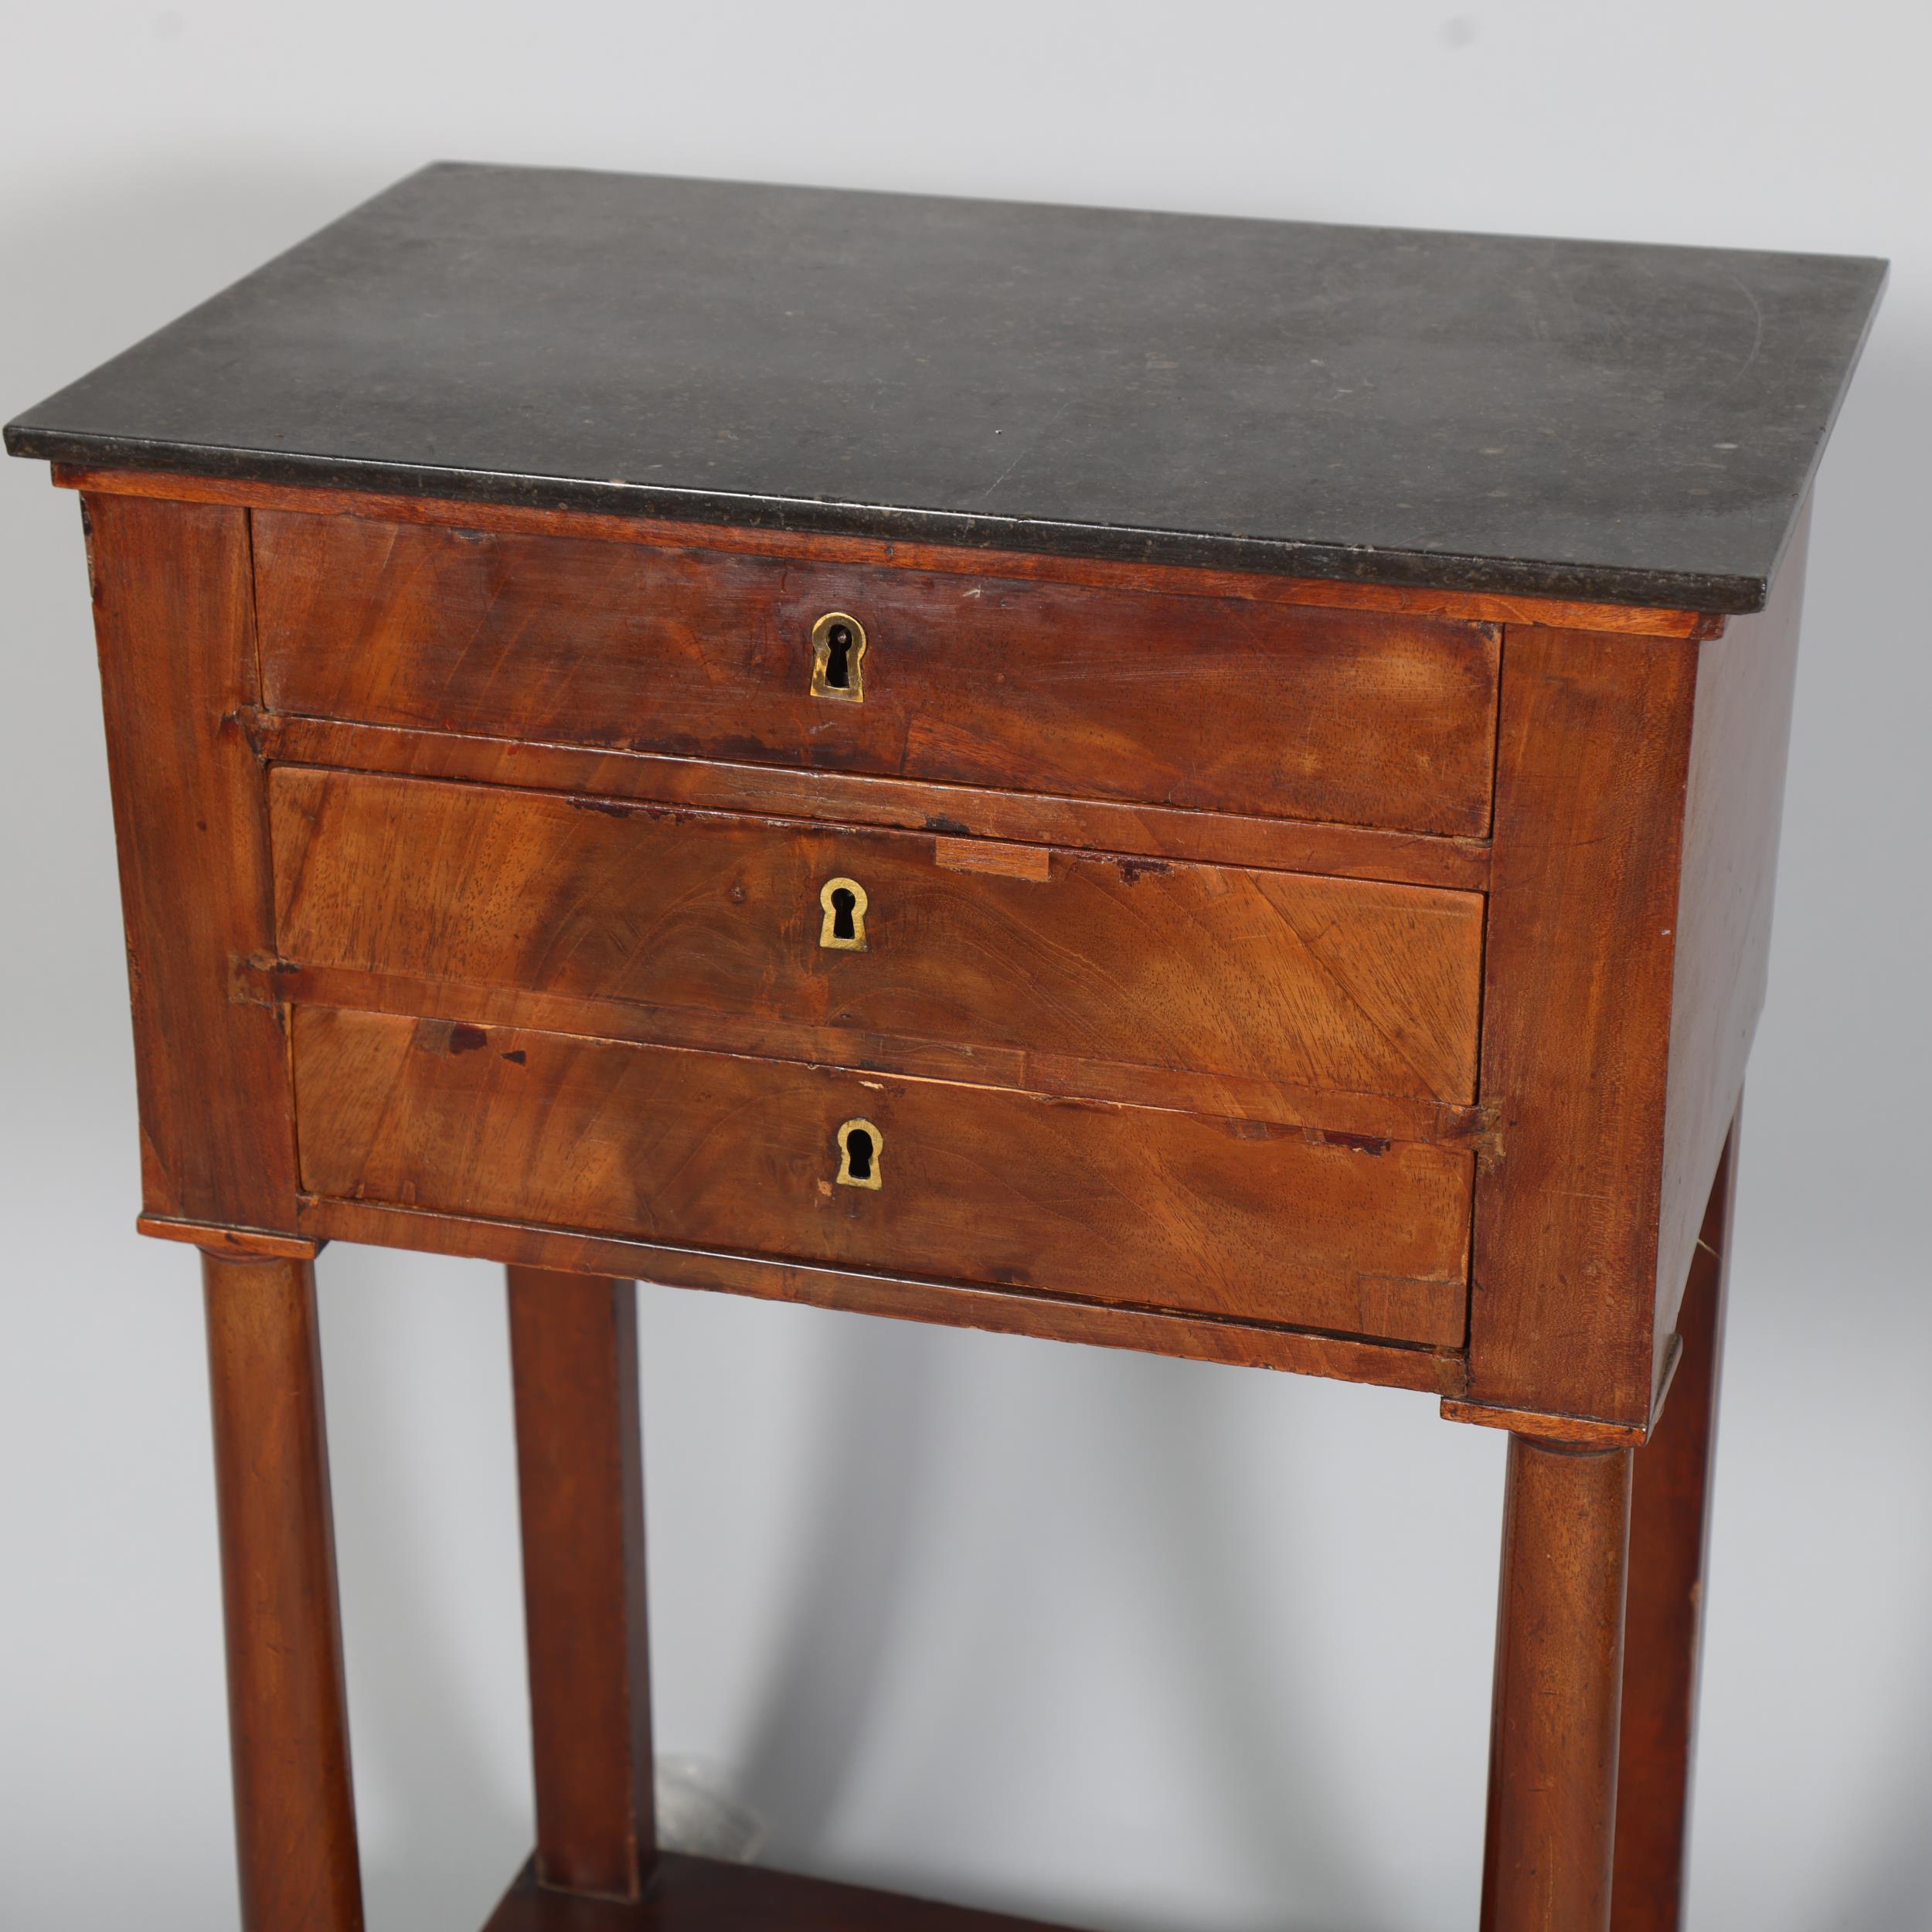 Georges Jacob of Paris, French Empire mahogany 3-drawer side table, circa 1800 - 1810, with black - Image 3 of 4